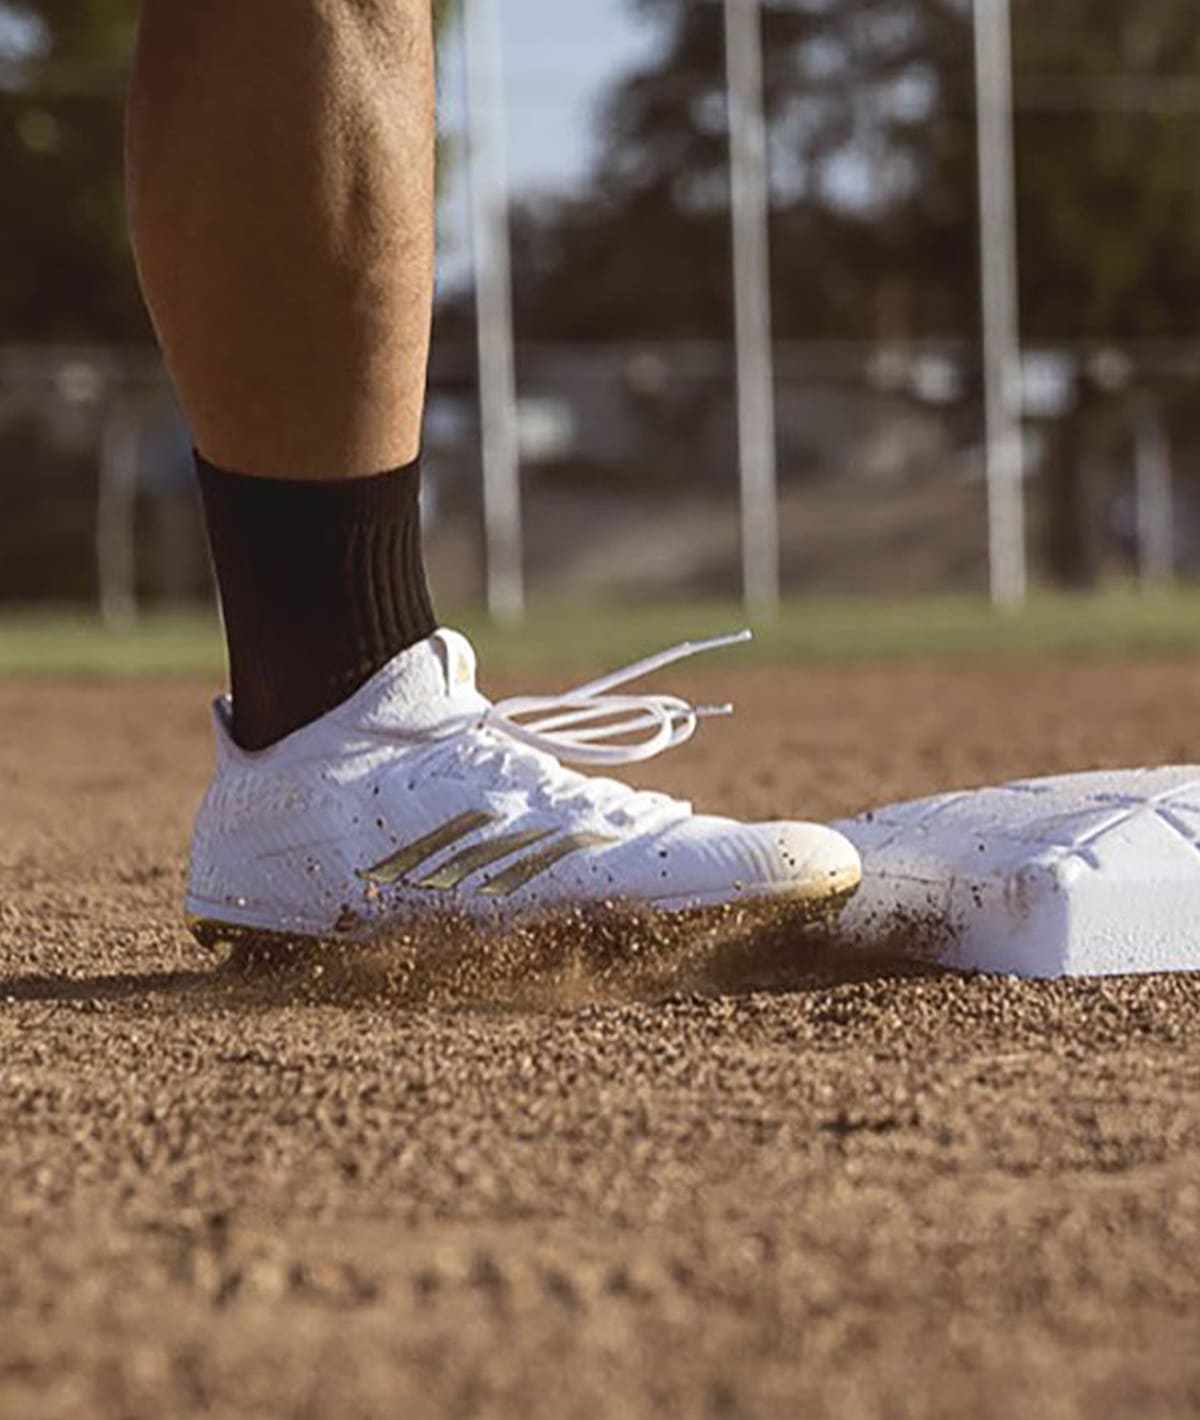 How to Clean Baseball Cleats?